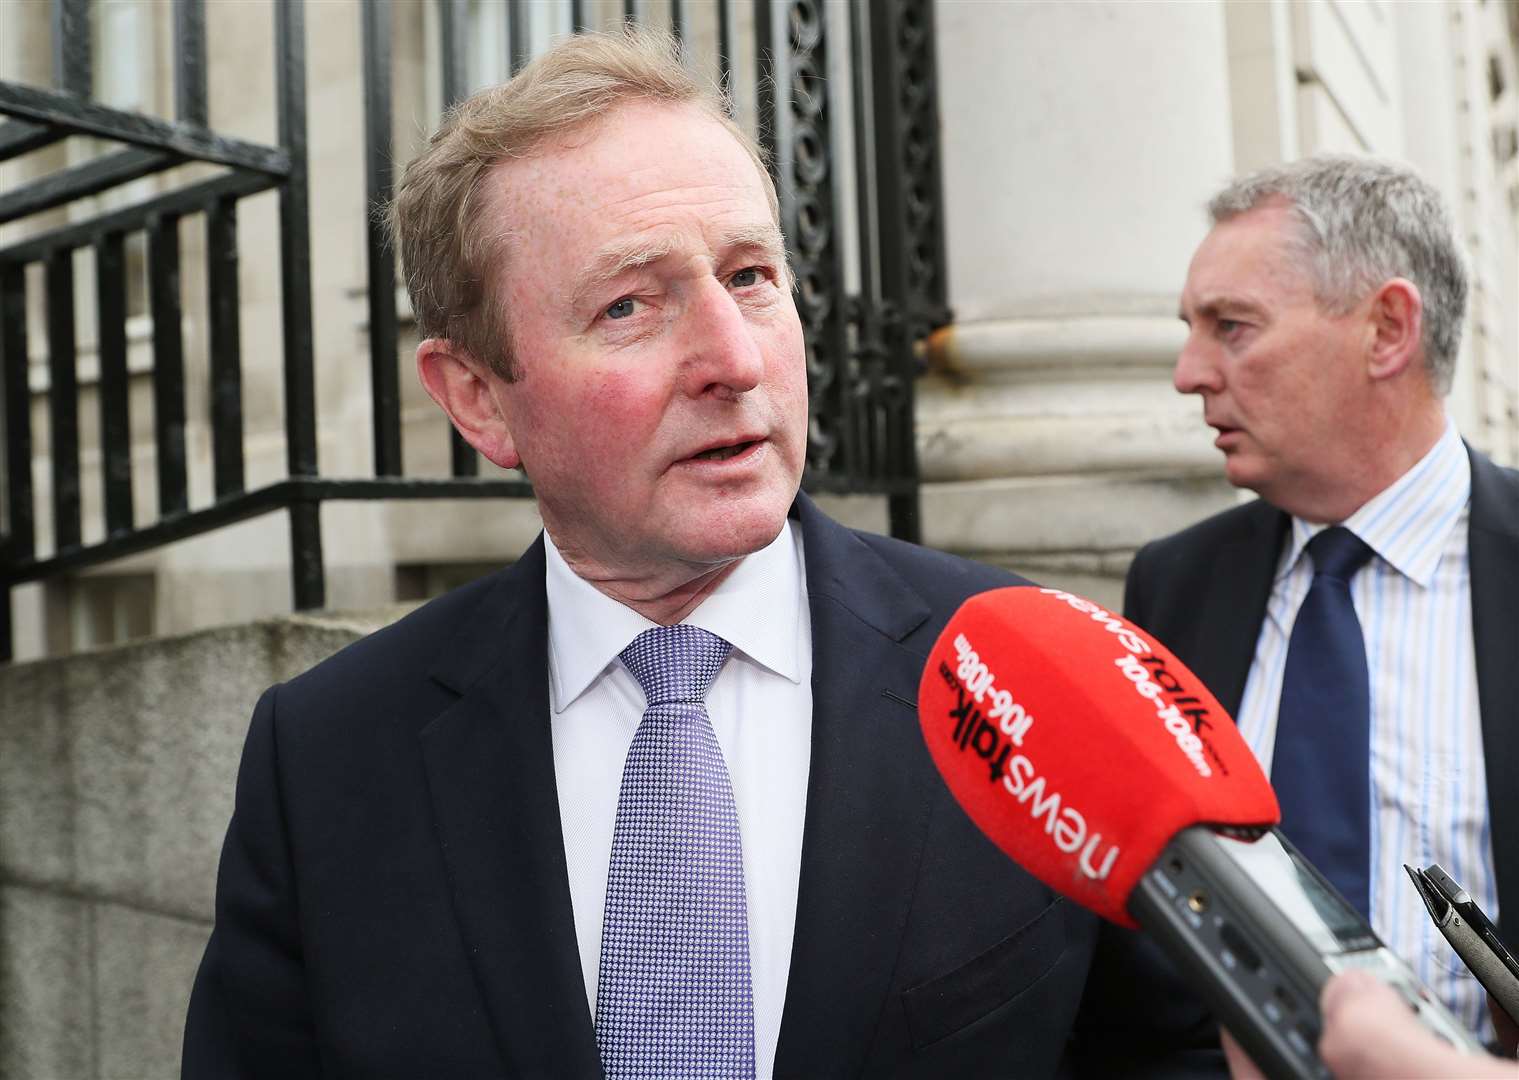 Under former premier Enda Kenny he faced controversy over the imposition of deeply unpopular water charges in 2014 (Brian Lawless/PA)